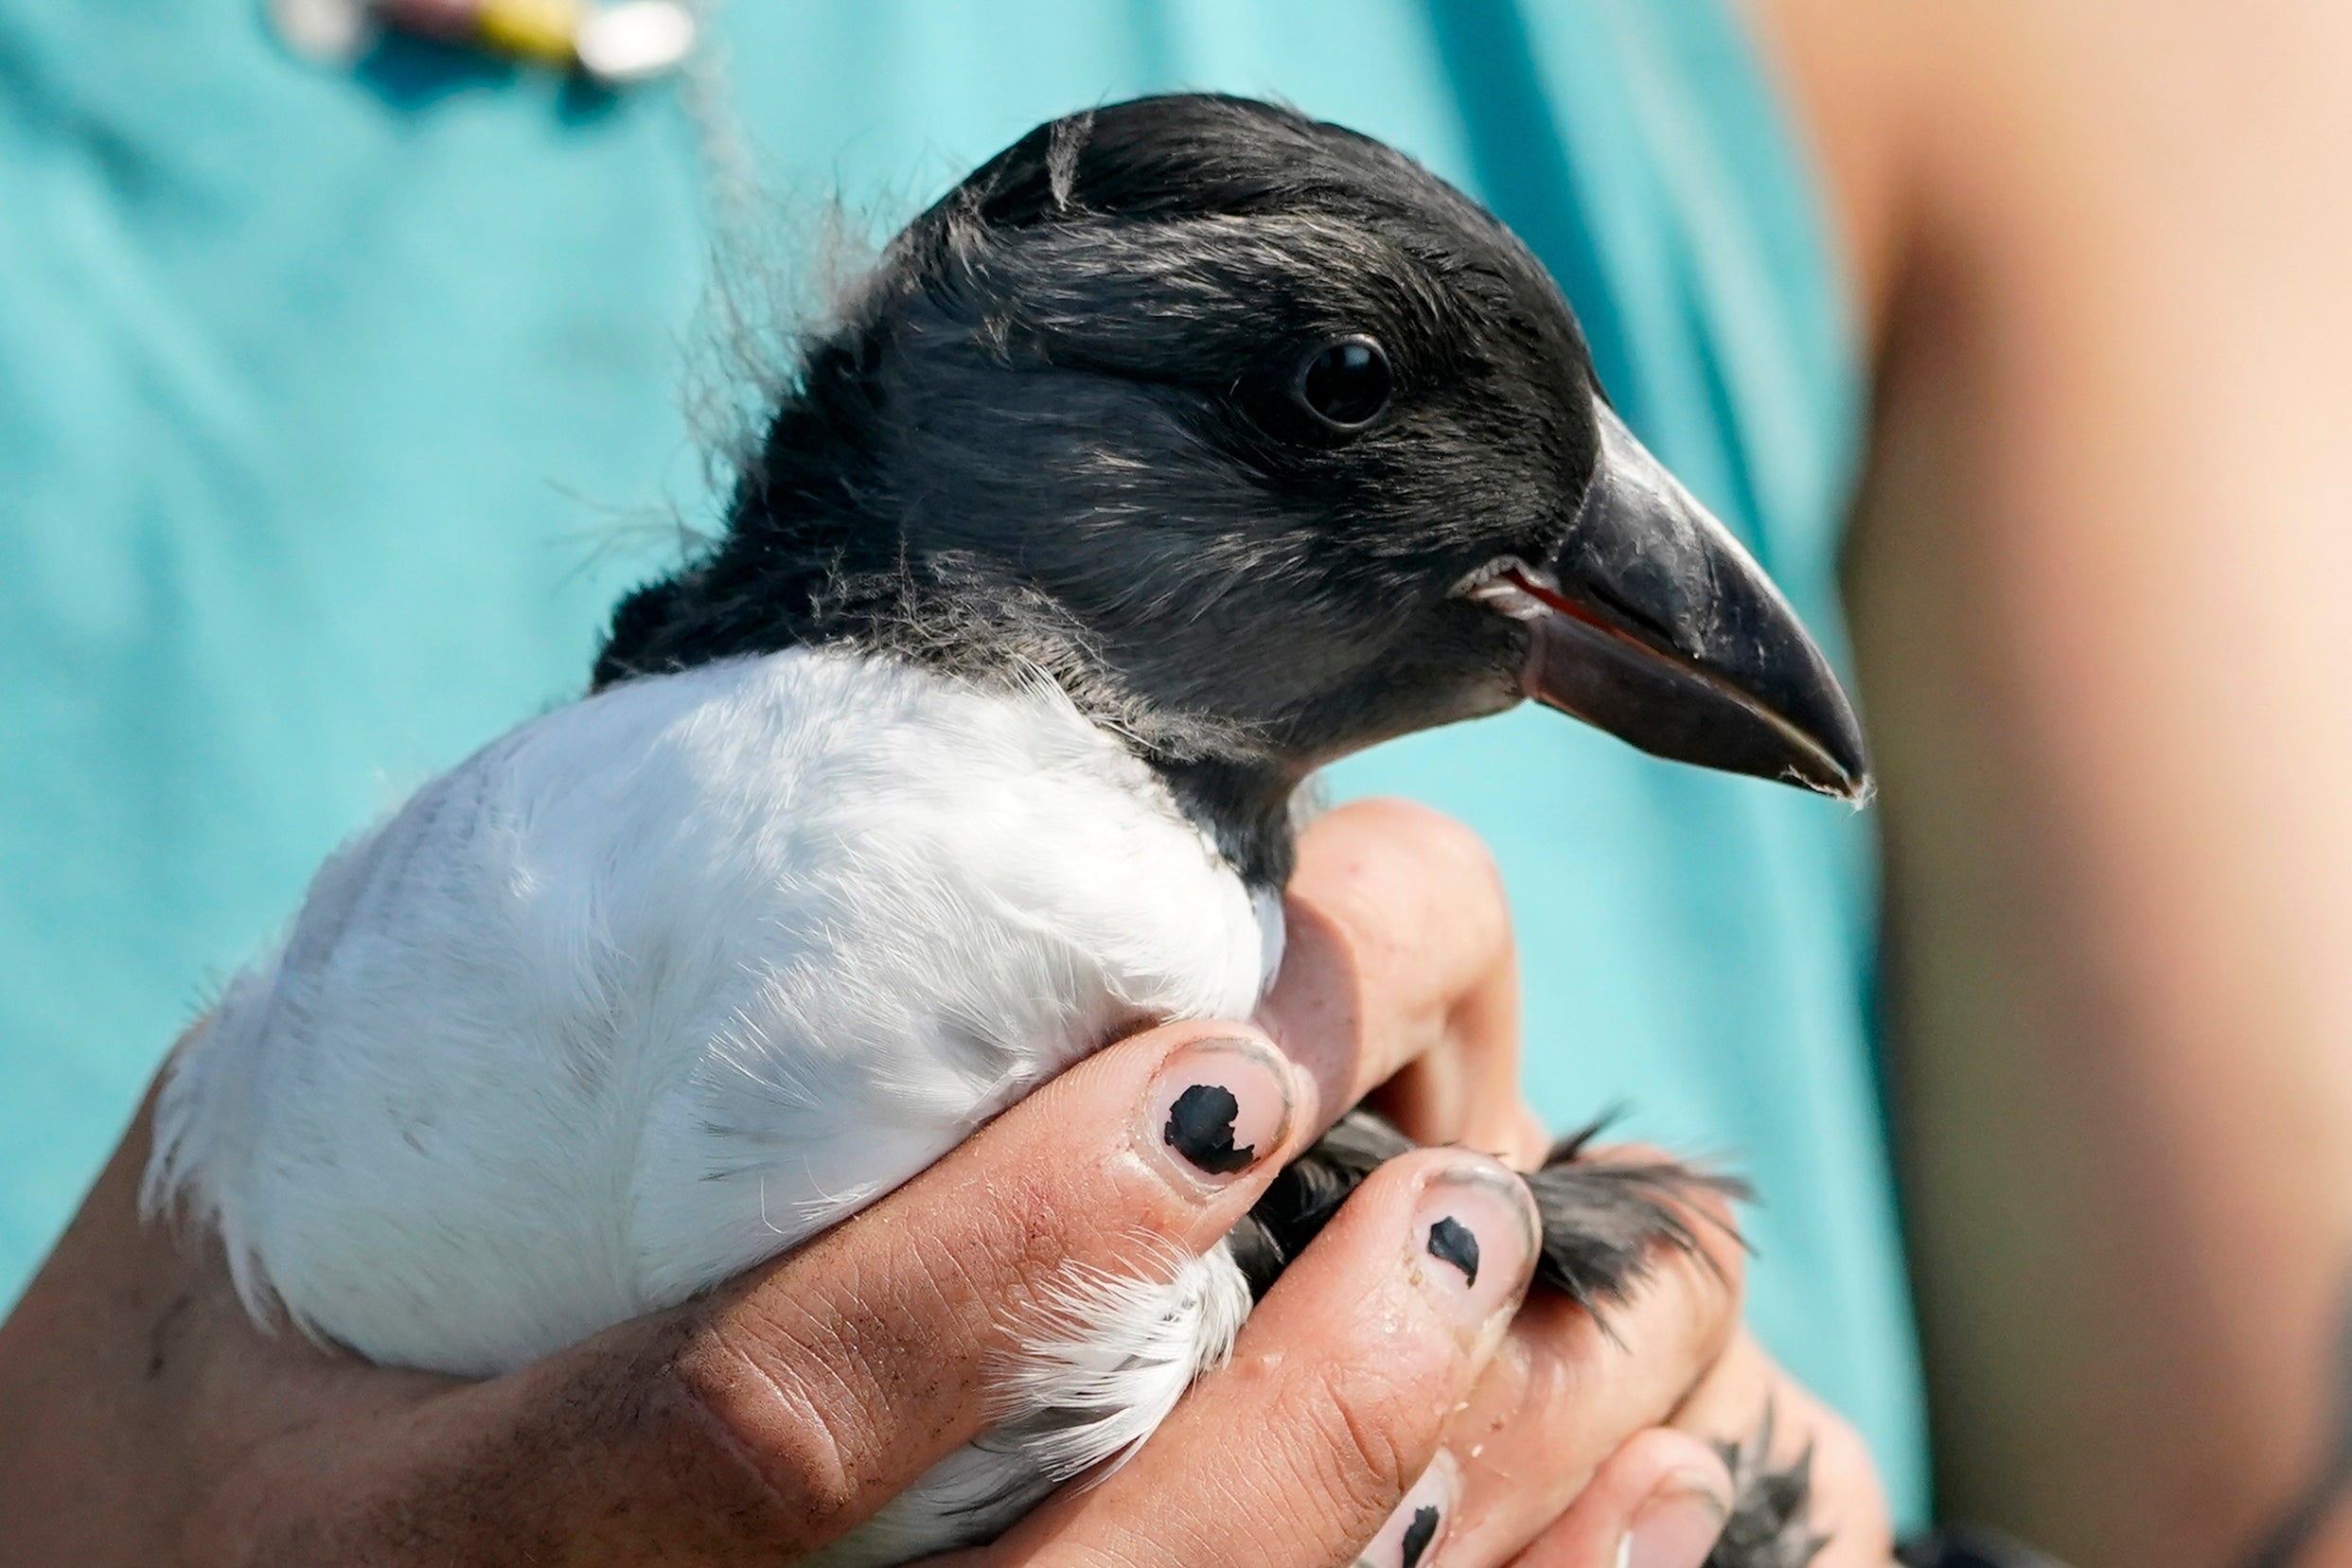 An Atlantic puffin chick is held by a biologist.